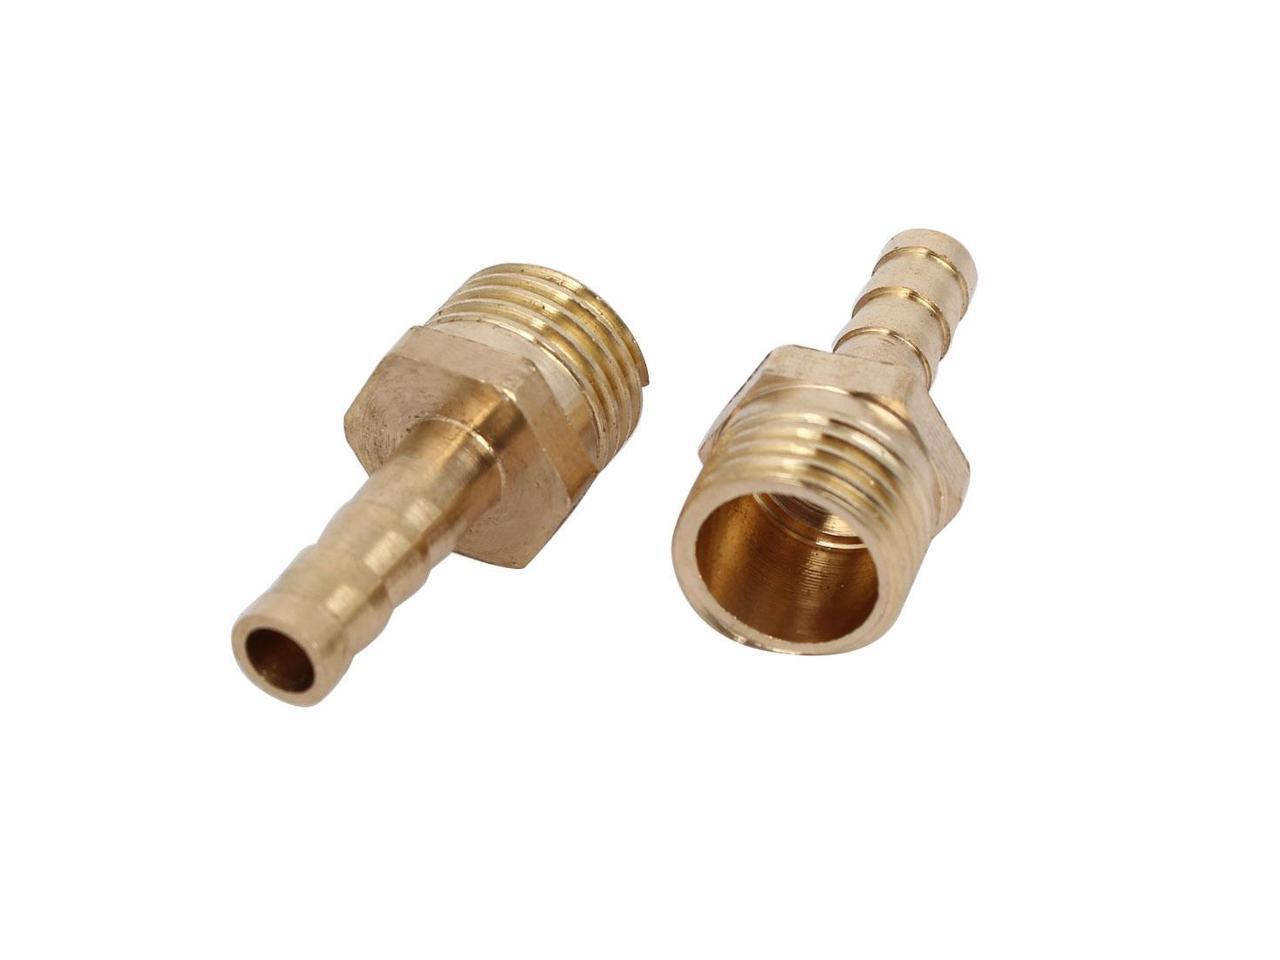 1/8BSP Male Thread 6mm Hose Barb Tubing Fitting Coupler Connector Adapter 4pcs 